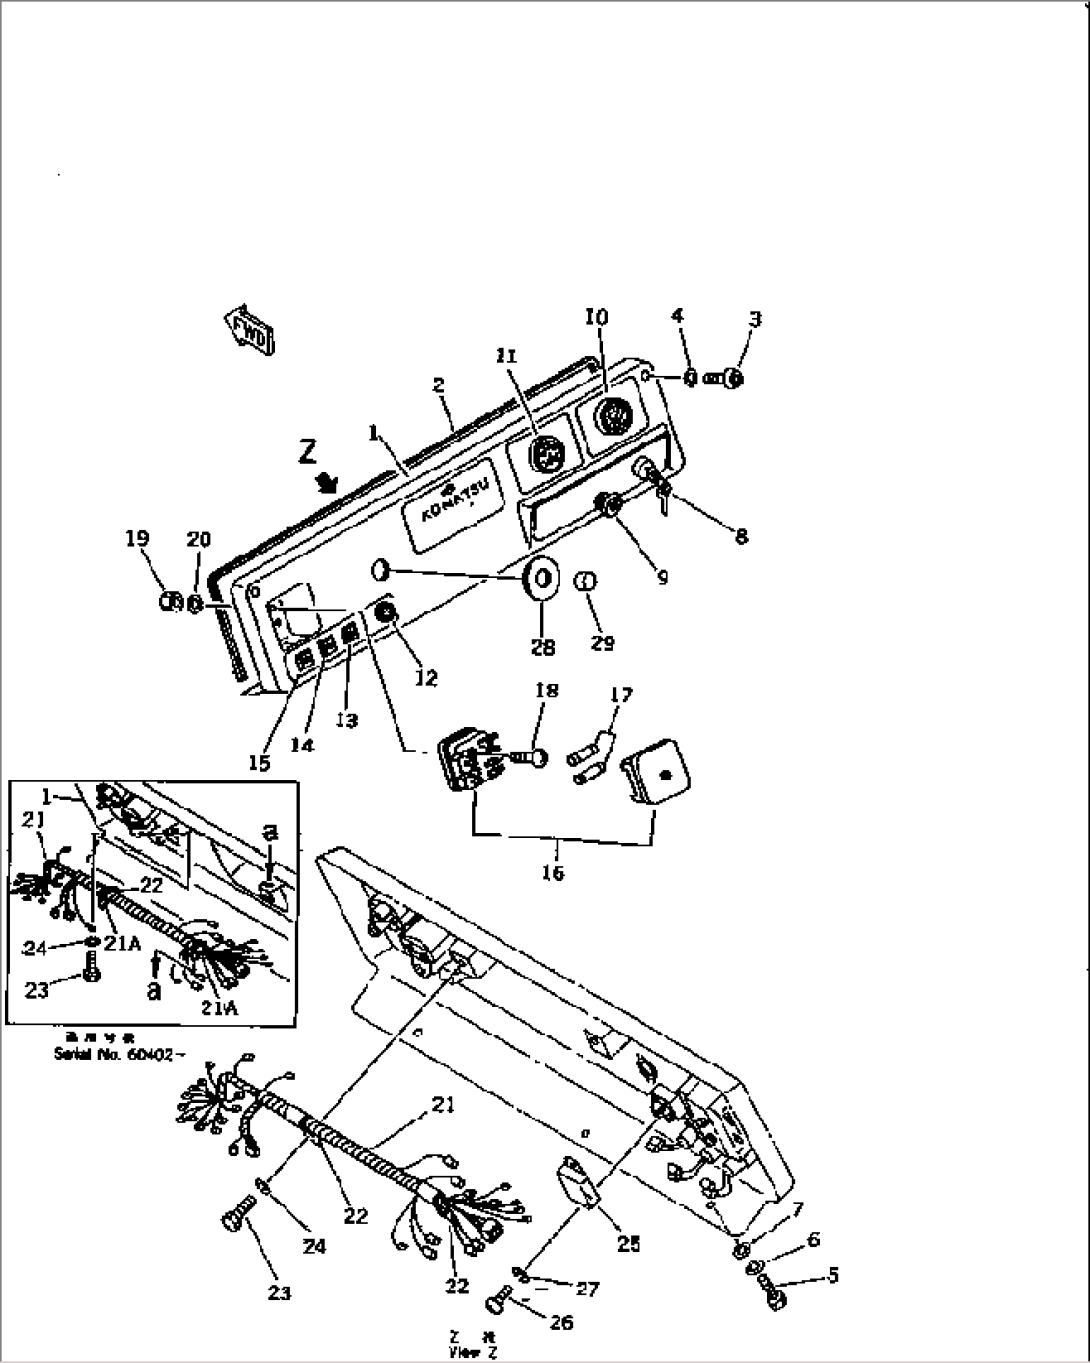 INSTRUMENT PANEL (FOR PEDAL STEERING) (NOISE SUPPRESSION FOR EC)(#60280-)